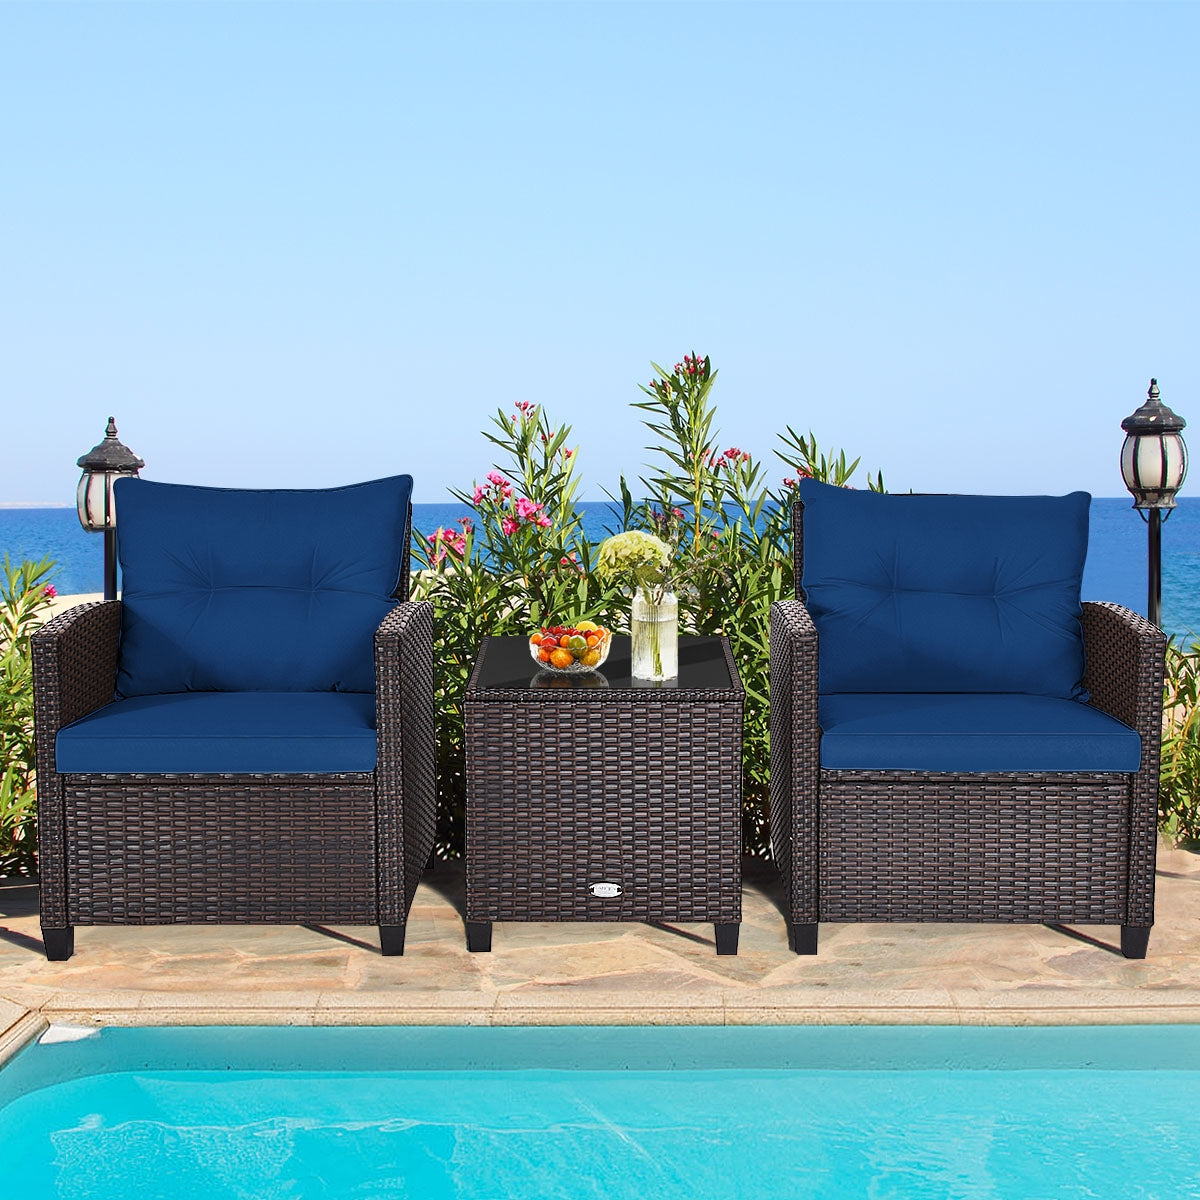 3 Pieces Rattan Patio Furniture Set with Easy-to-clean Cushions